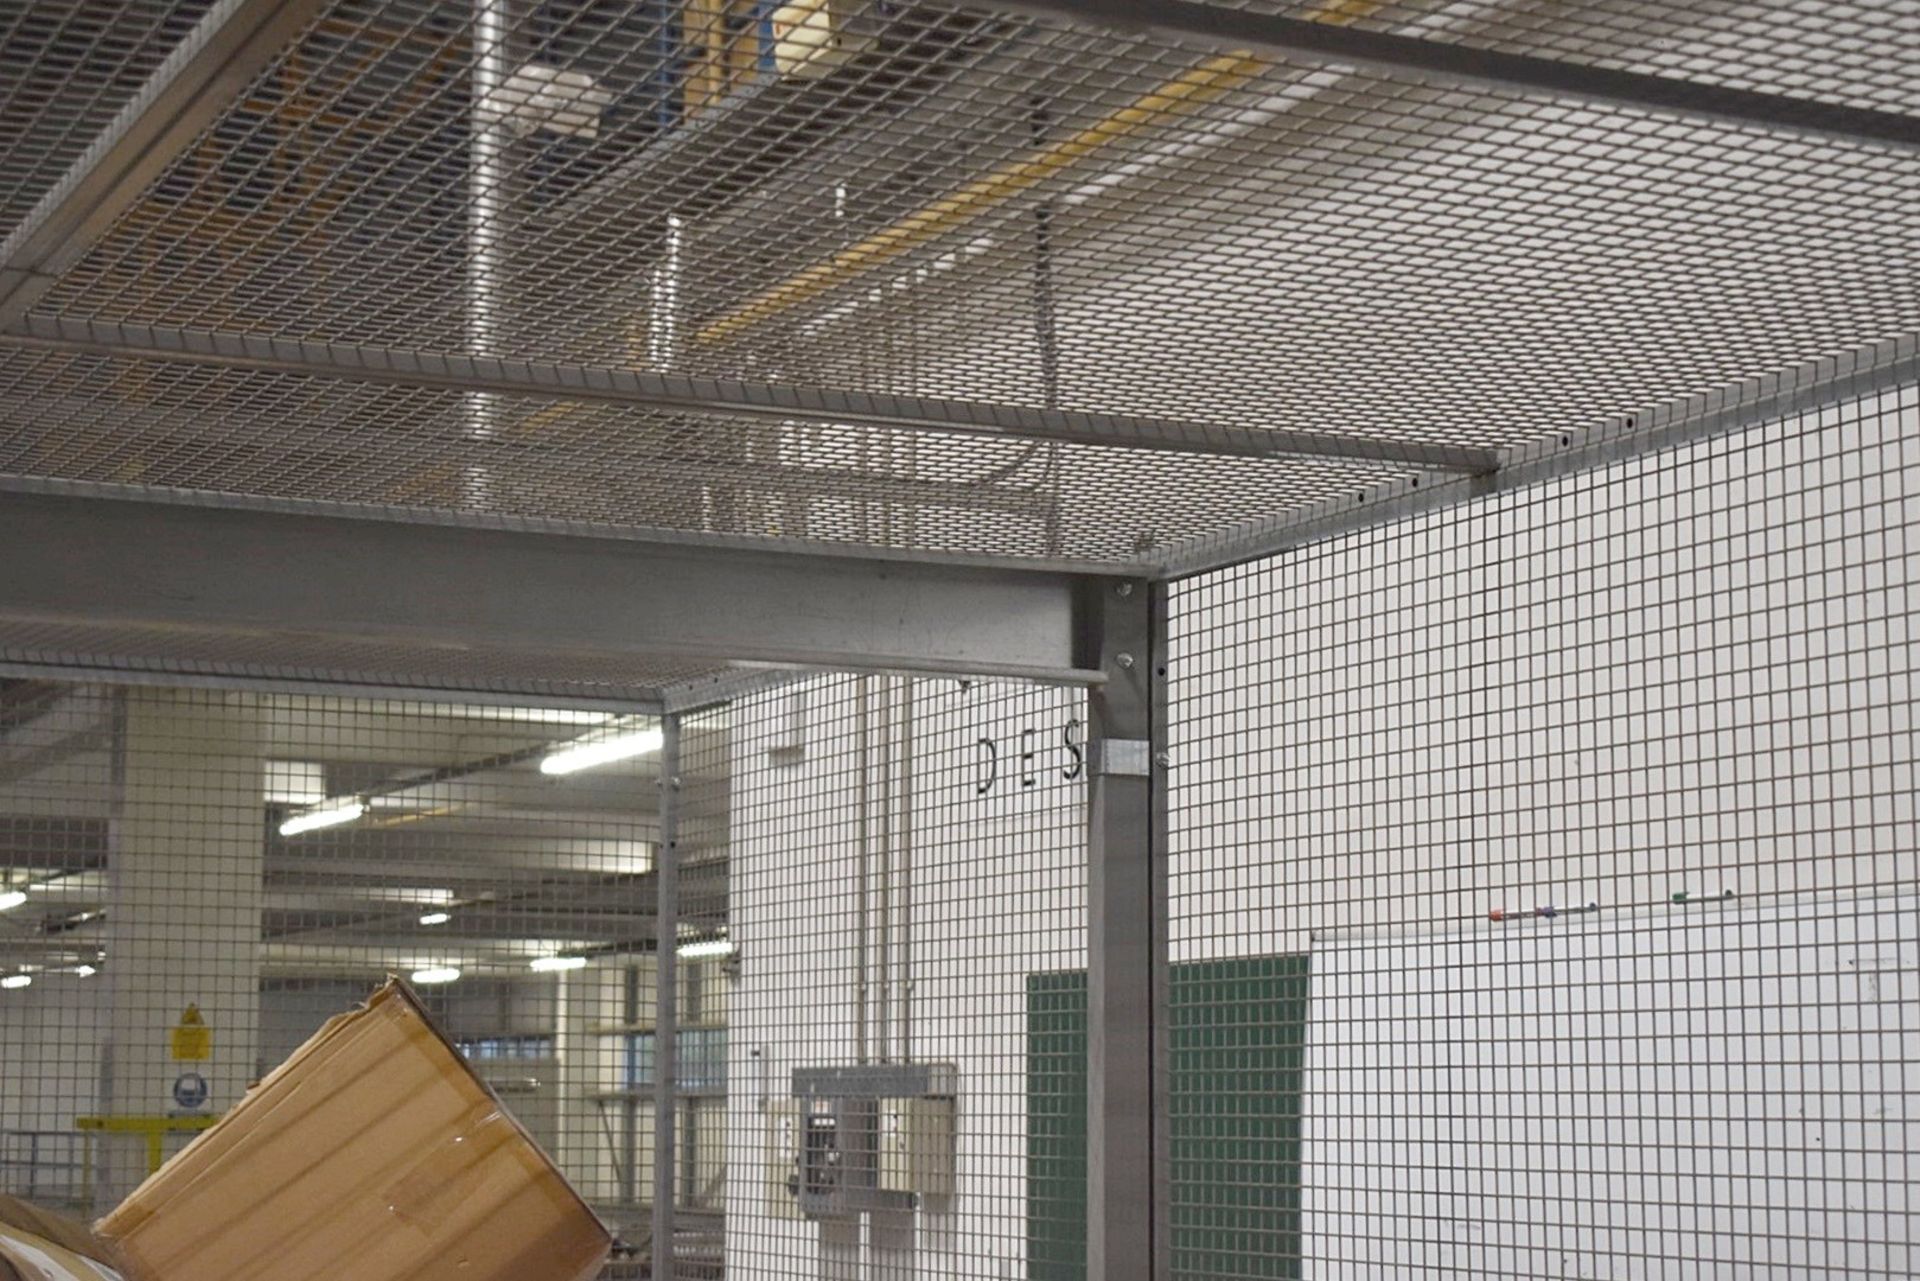 1 x Security Cage Enclosure For Warehouses - Ideal For Storing High-Value Stock or Hazardous Goods - - Image 12 of 12